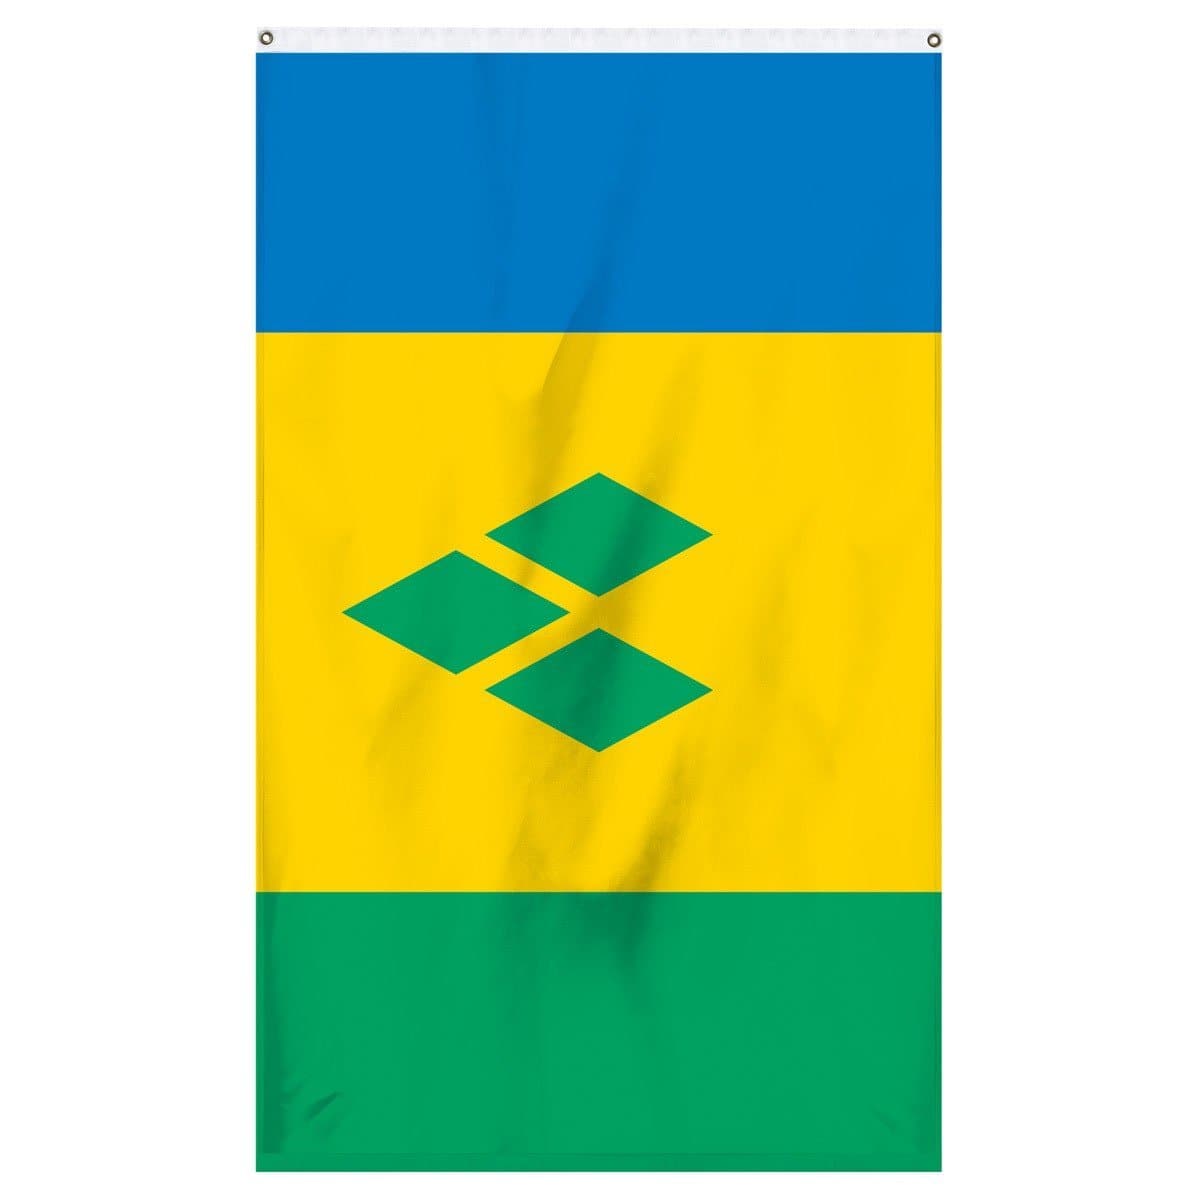 Saint Vincent and the Grenadines National flag for sale to buy online. Blue, yellow, and green flag with a three green diamonds in the middle.